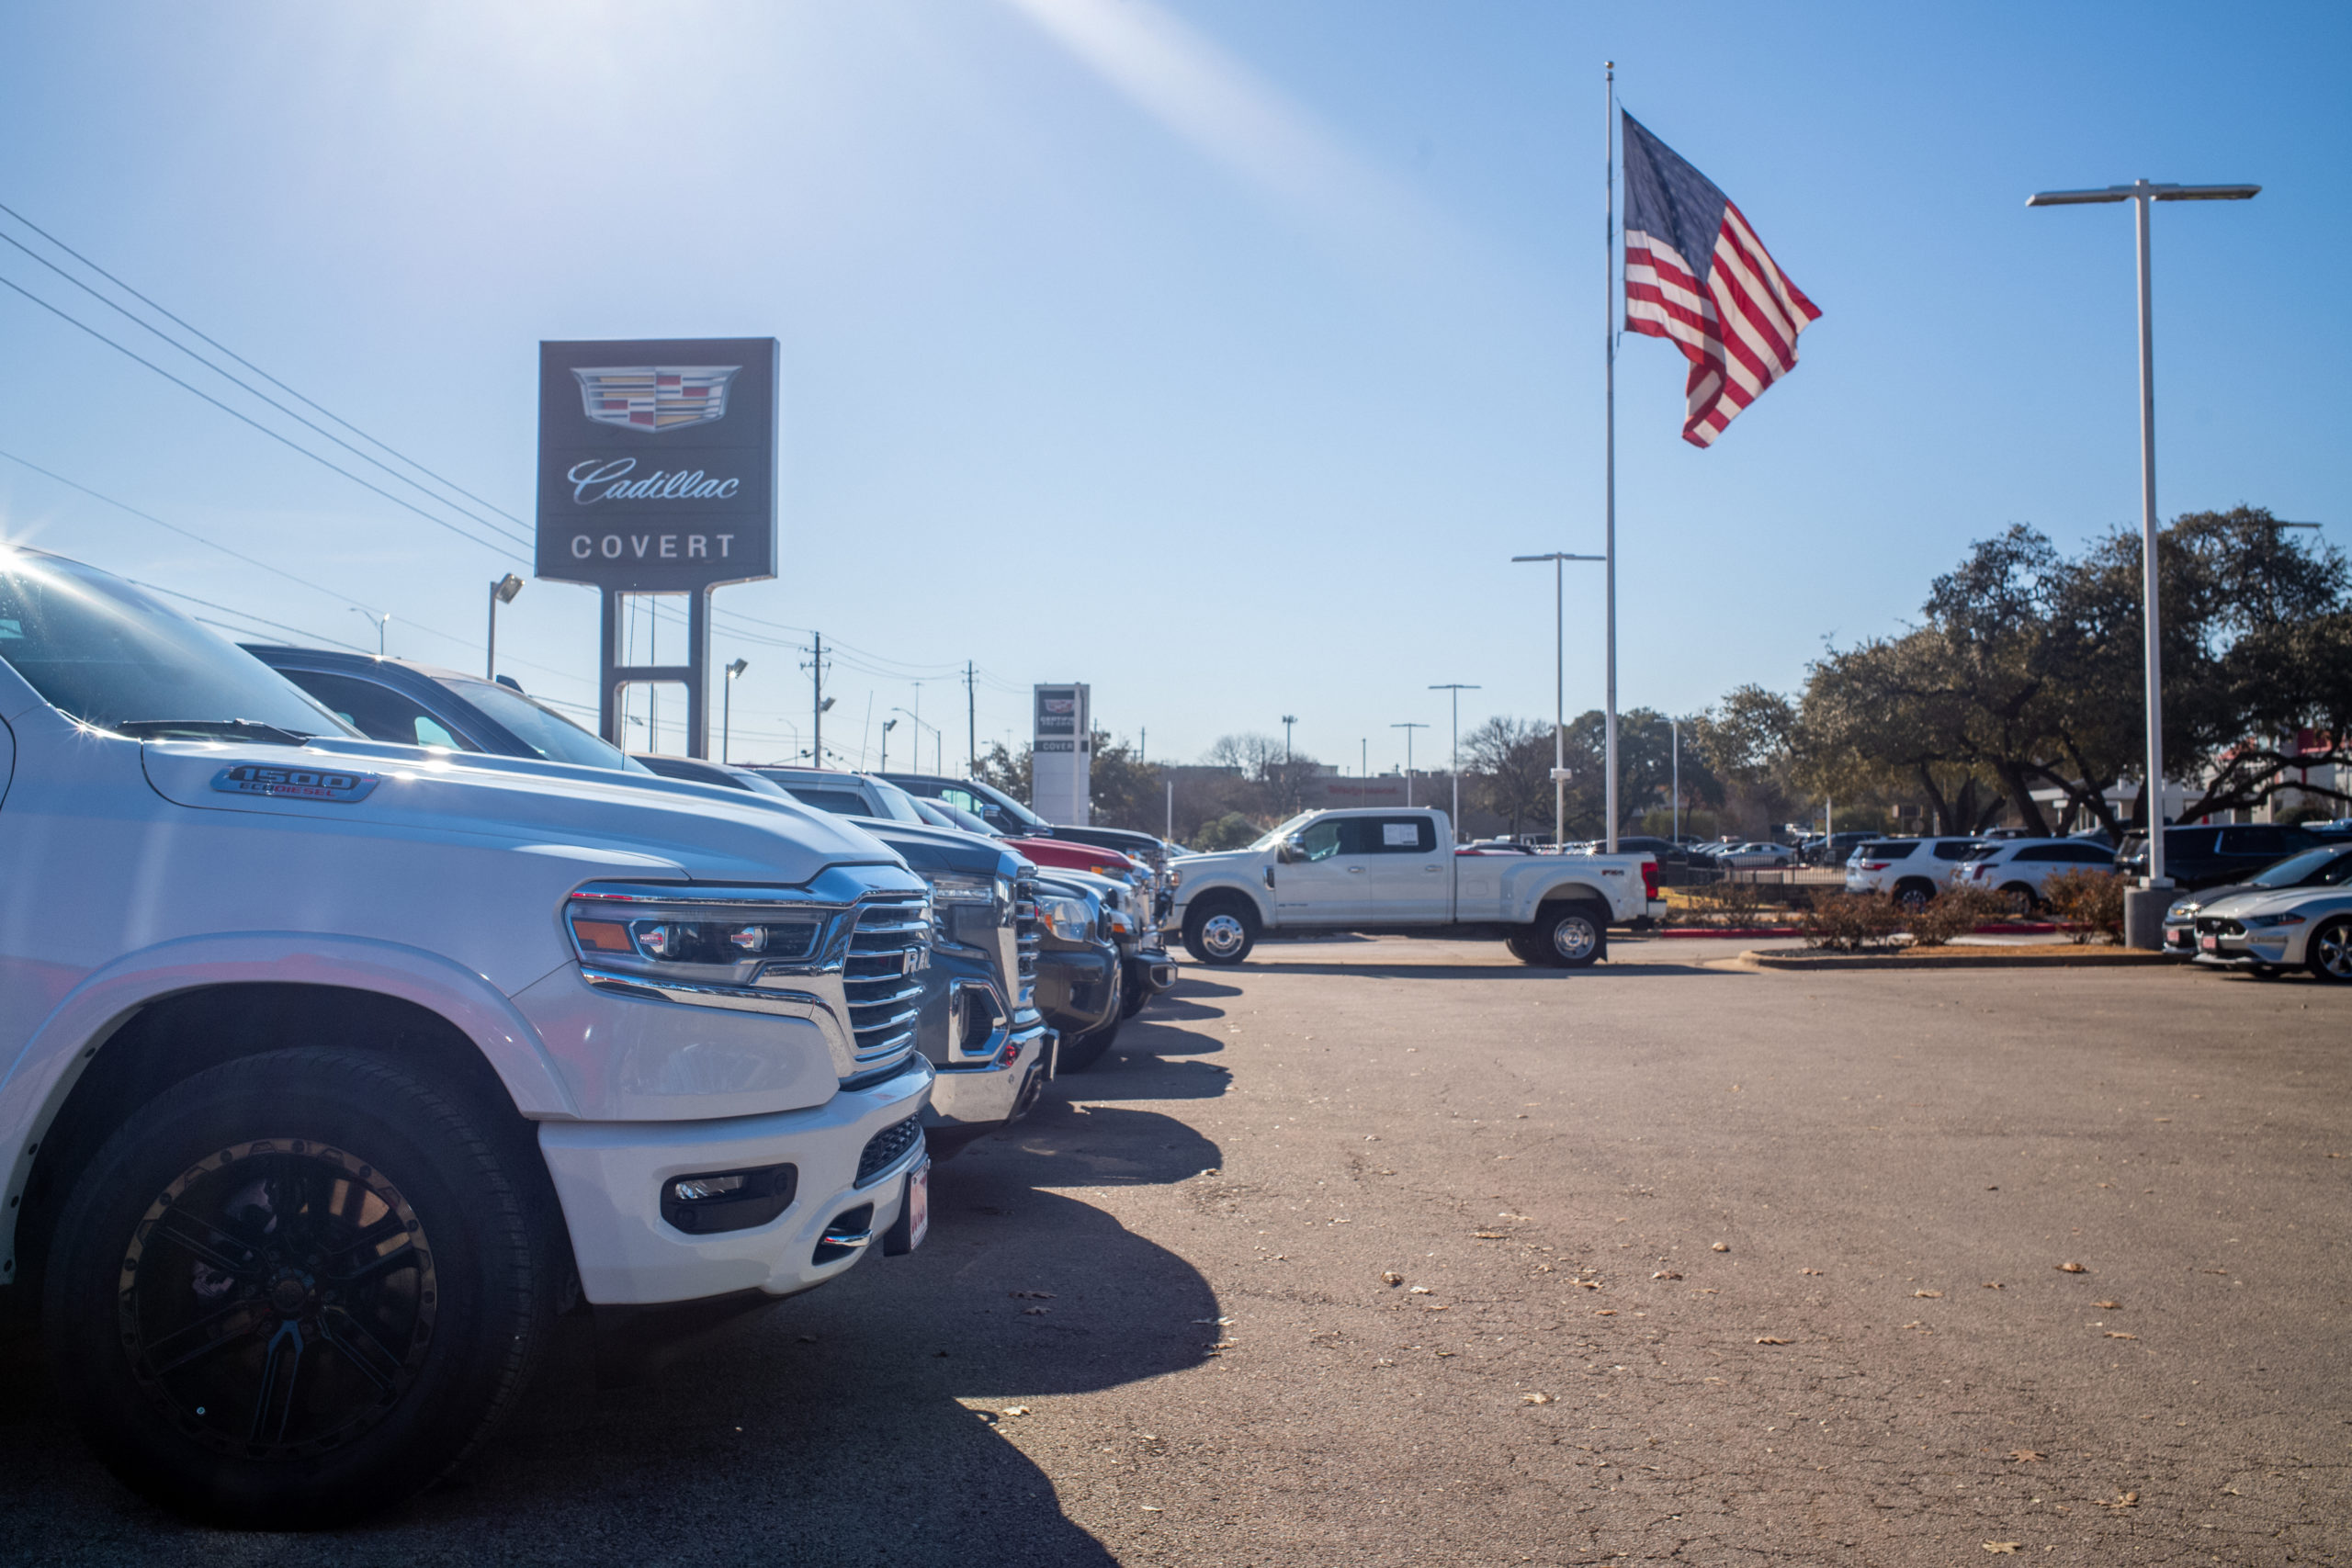 AUSTIN, TEXAS - JANUARY 05: GMC pickup trucks are displayed for sale on a lot at a General Motors dealership on January 05, 2023 in Austin, Texas. General Motors has reclaimed its title as the top-selling carmaker in the U.S. after outselling Toyota in 2022. GM reported that the company sold approximately 2.7 million vehicles last year, while Toyota came in just over 2.1 million vehicles sold. (Photo by Brandon Bell/Getty Images)